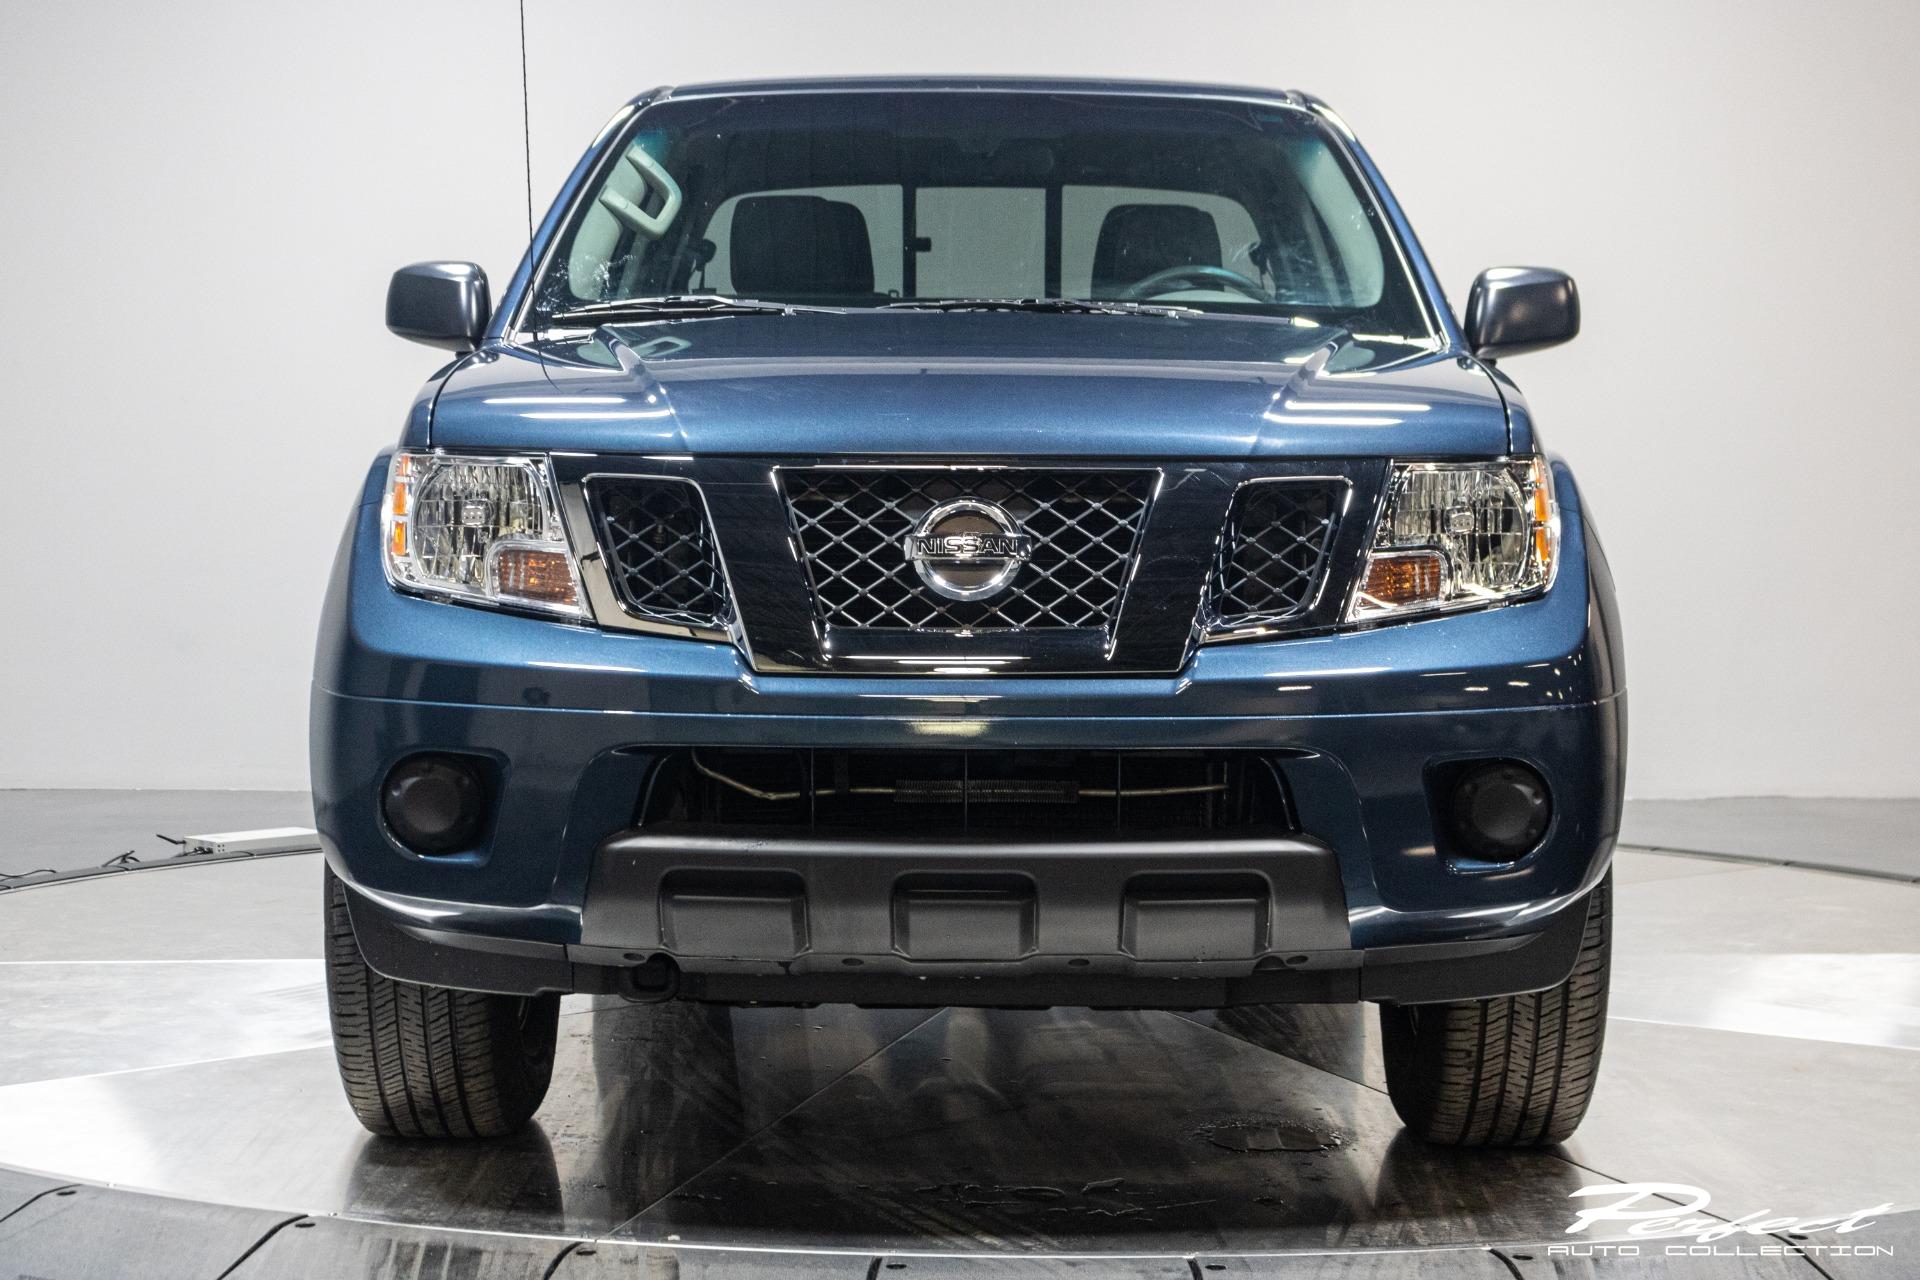 Used 2019 Nissan Frontier SV For Sale ($19,993) | Perfect Auto 2019 Nissan Frontier Sv V6 Towing Capacity